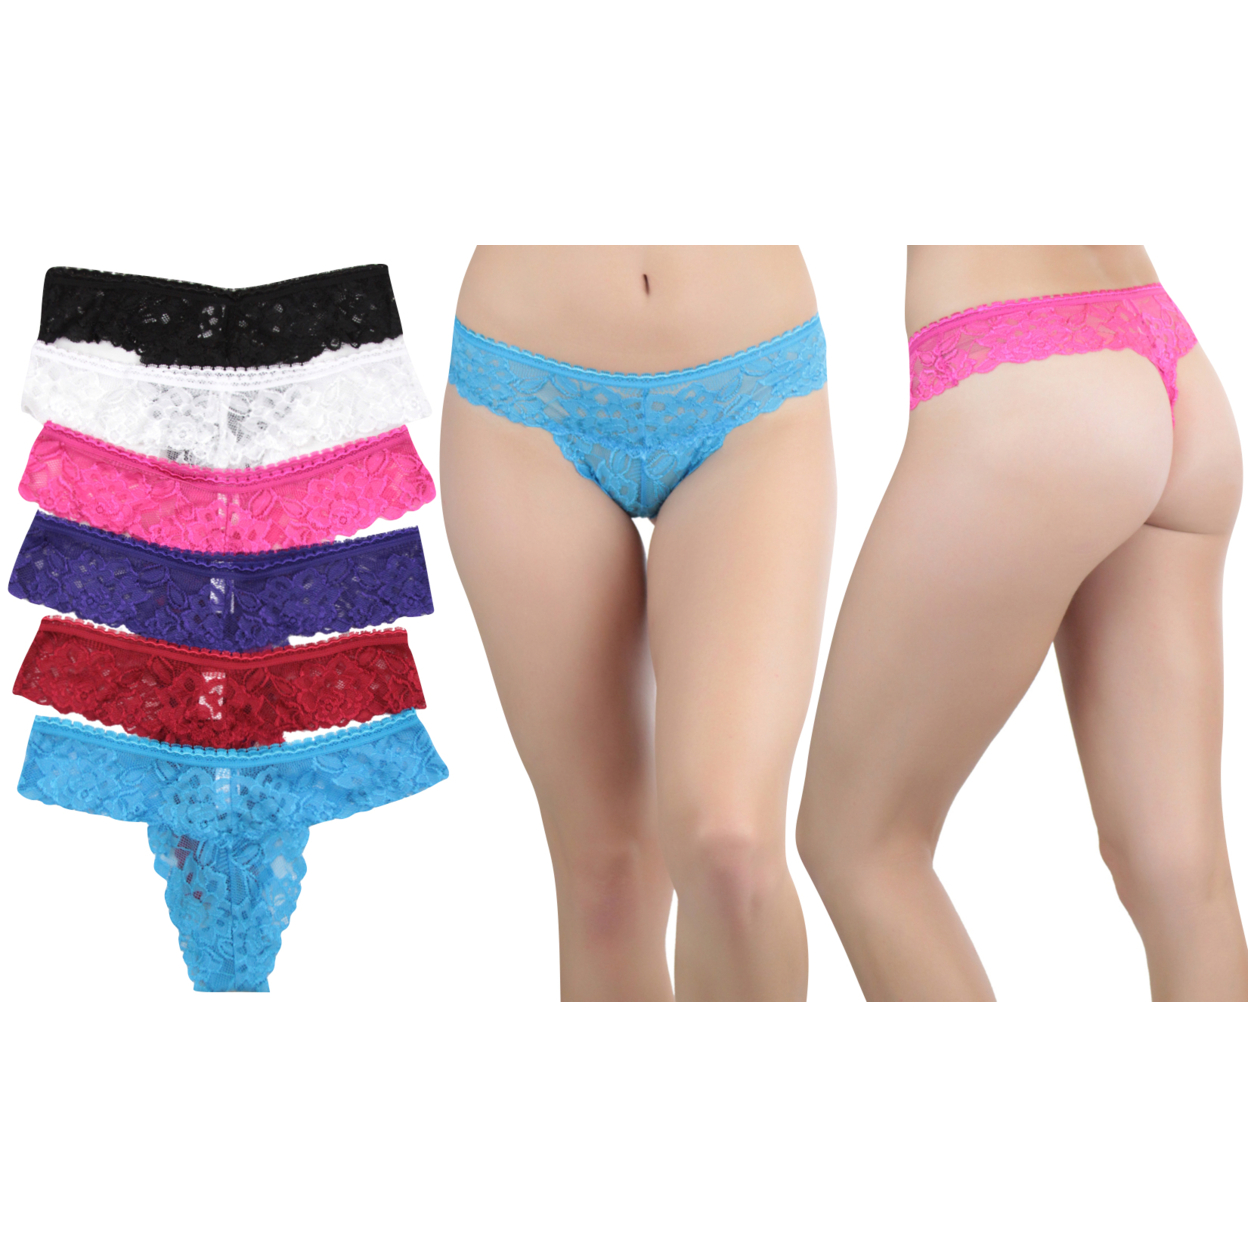 6 Pack Of Women's Low Rise Floral Thongs - Small